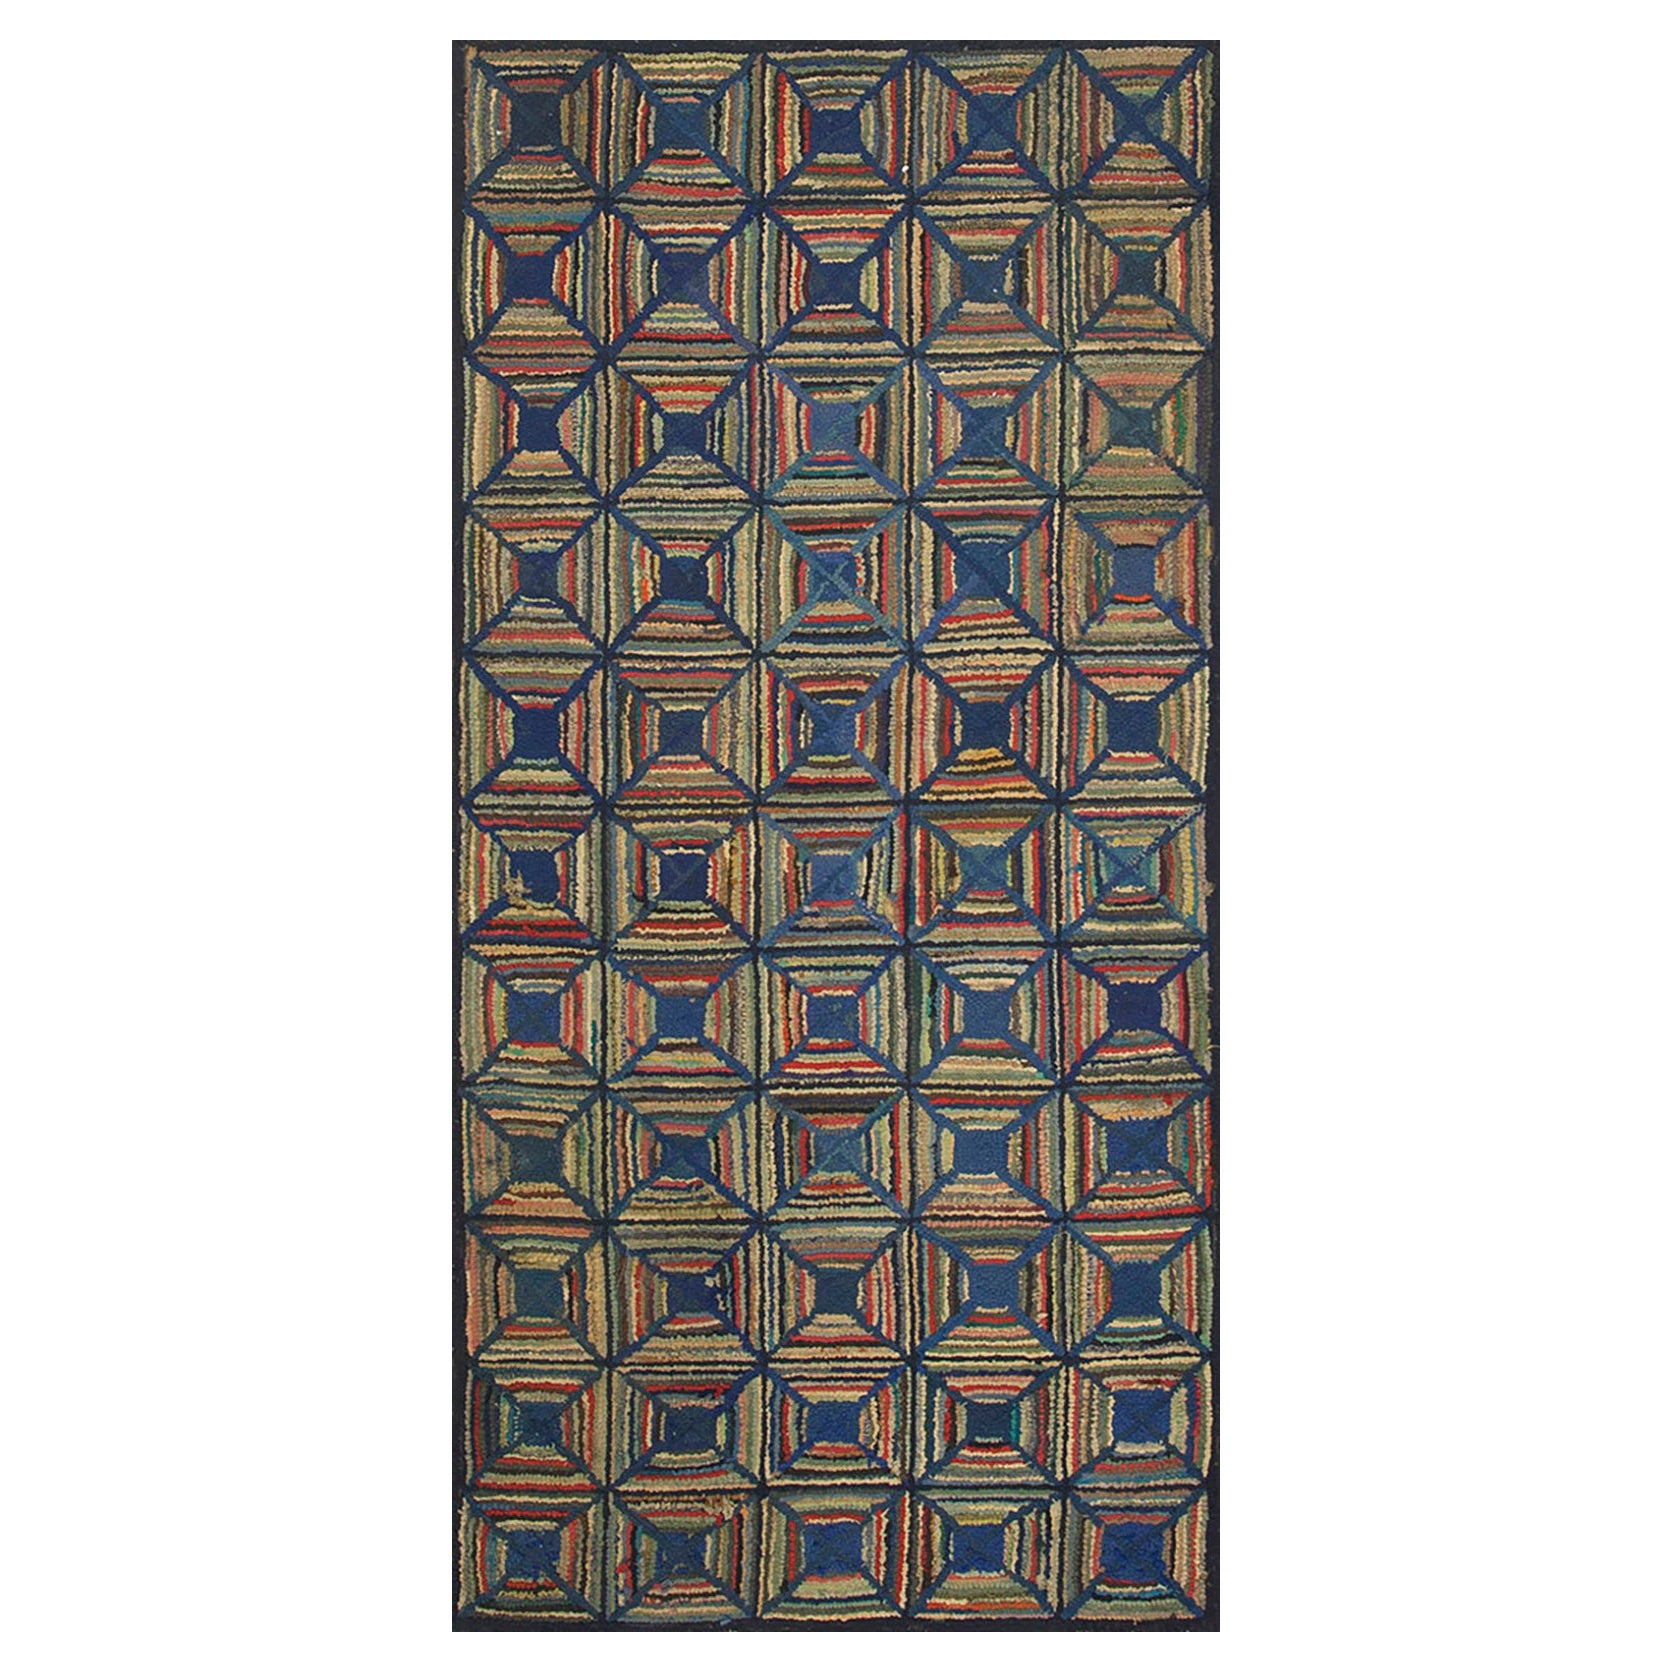 Early 20th Century American Hooked Rug 3' 2" x 6' 6" For Sale